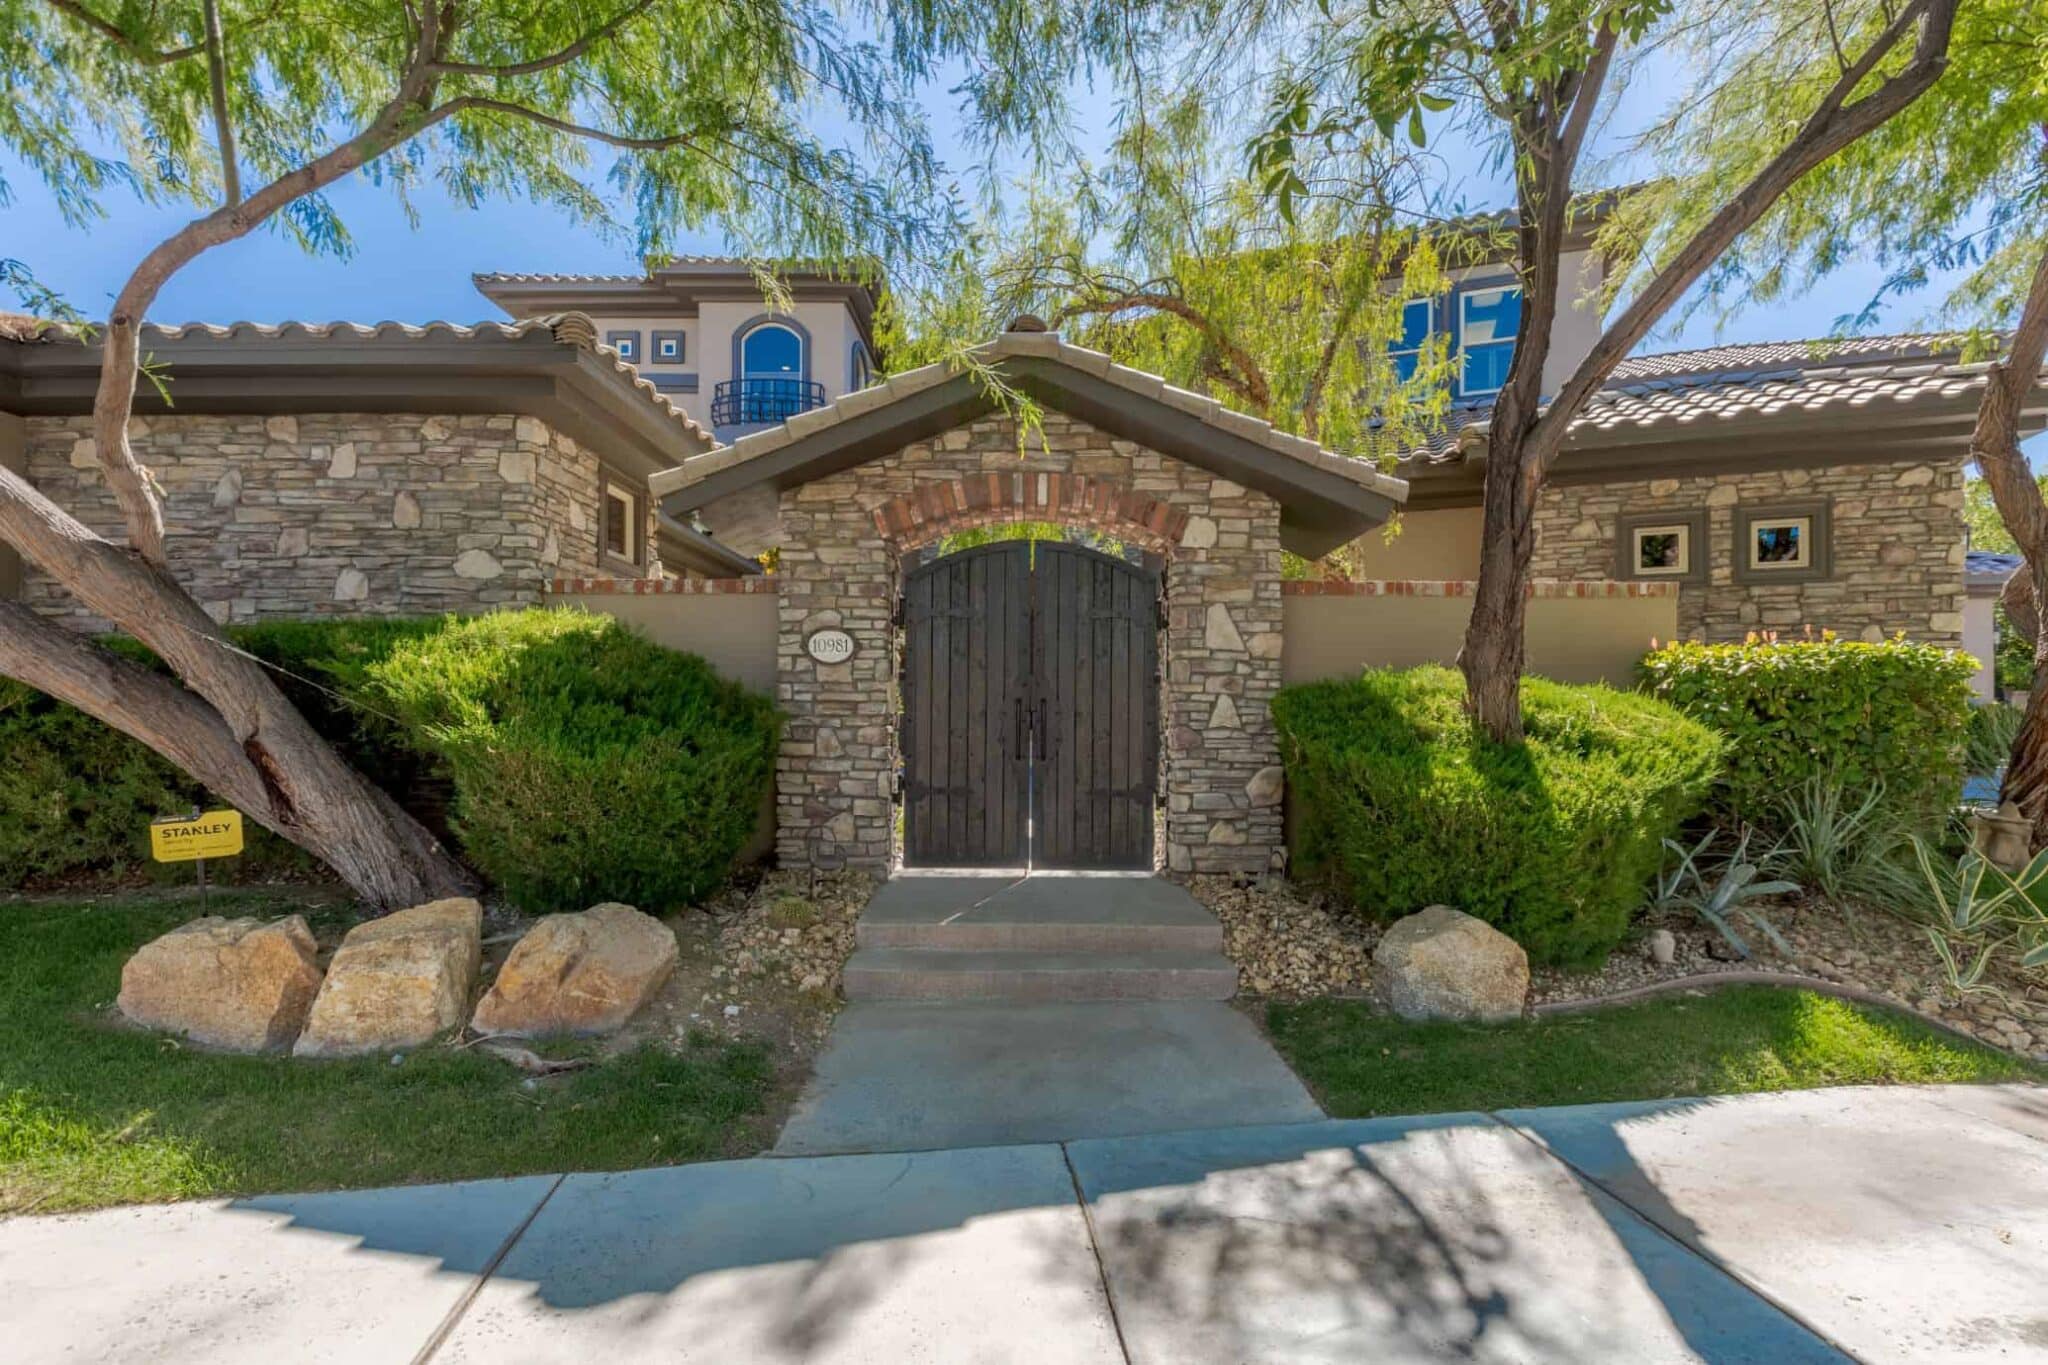 las-vegas-luxry-real-estate-realtor-rob-jensen-company-10981-willow-valley-court-willow-creek0474